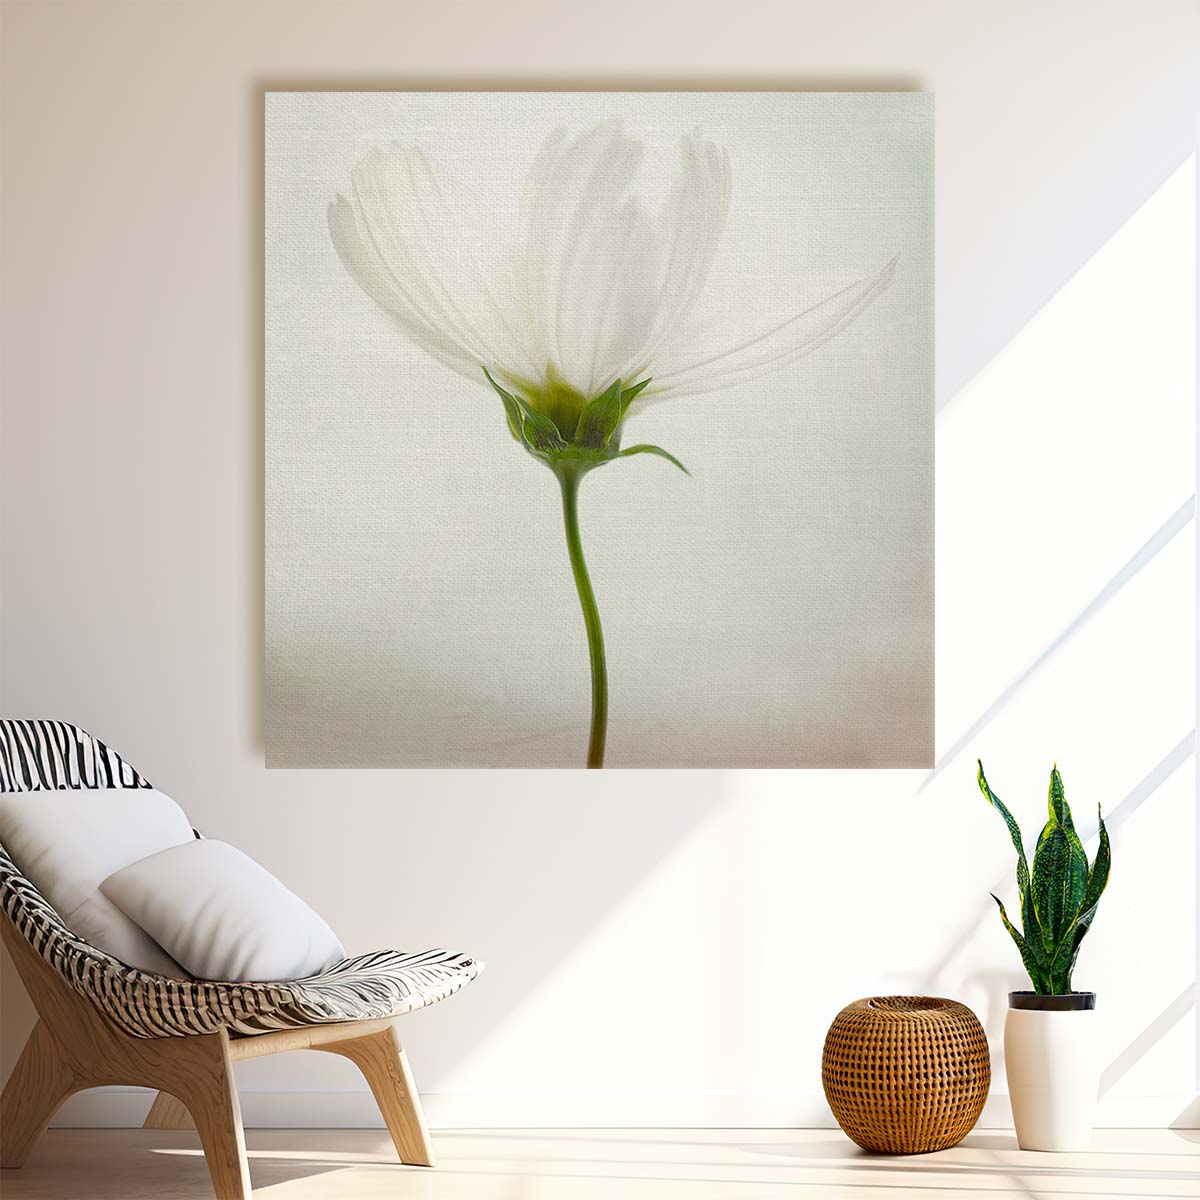 Bright and Delicate White Cosmos Flower Floral Photography Wall Art by Luxuriance Designs. Made in USA.